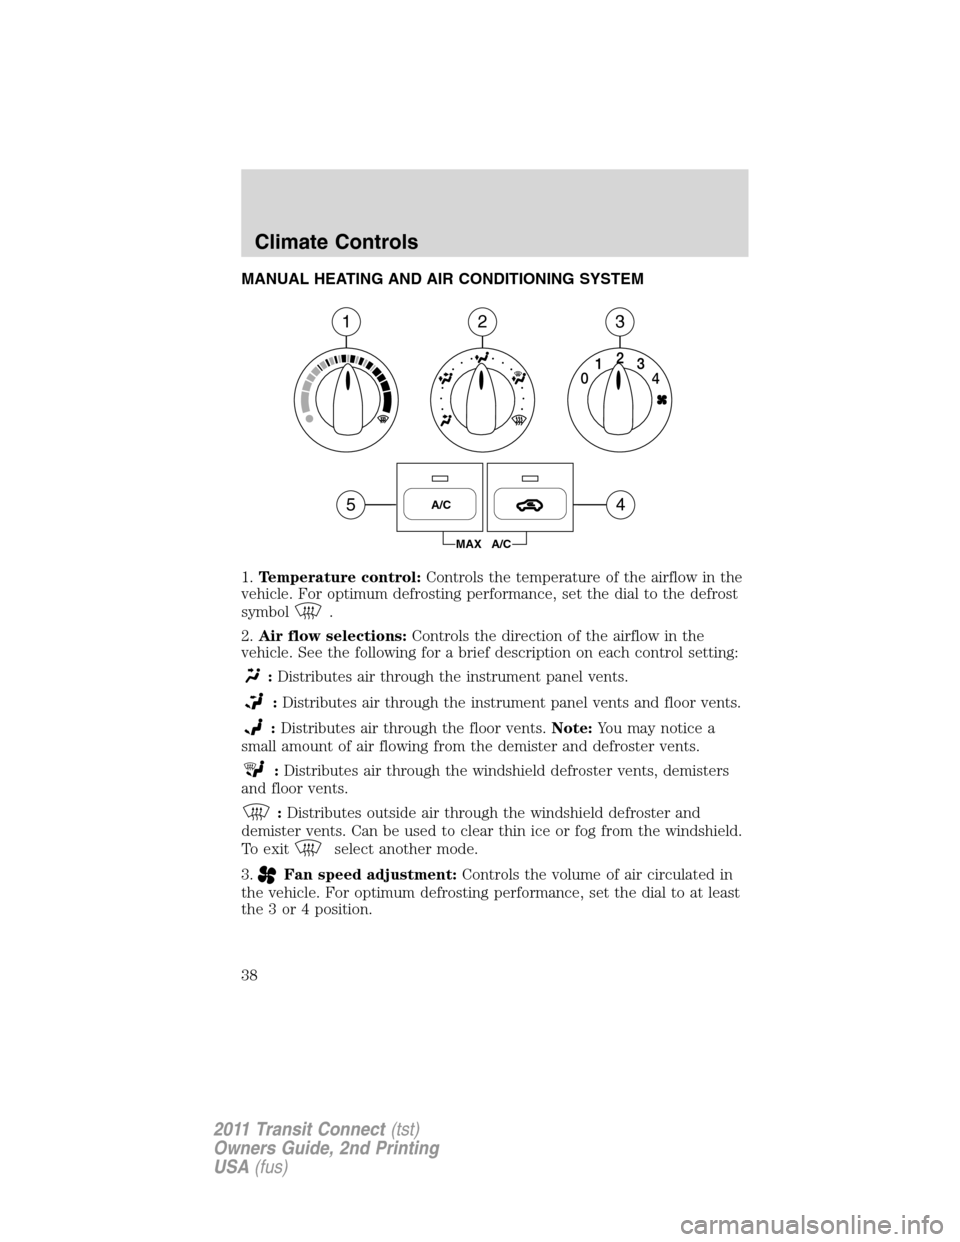 FORD TRANSIT CONNECT 2011 1.G Owners Guide MANUAL HEATING AND AIR CONDITIONING SYSTEM
1.Temperature control:Controls the temperature of the airflow in the
vehicle. For optimum defrosting performance, set the dial to the defrost
symbol
.
2.Air 